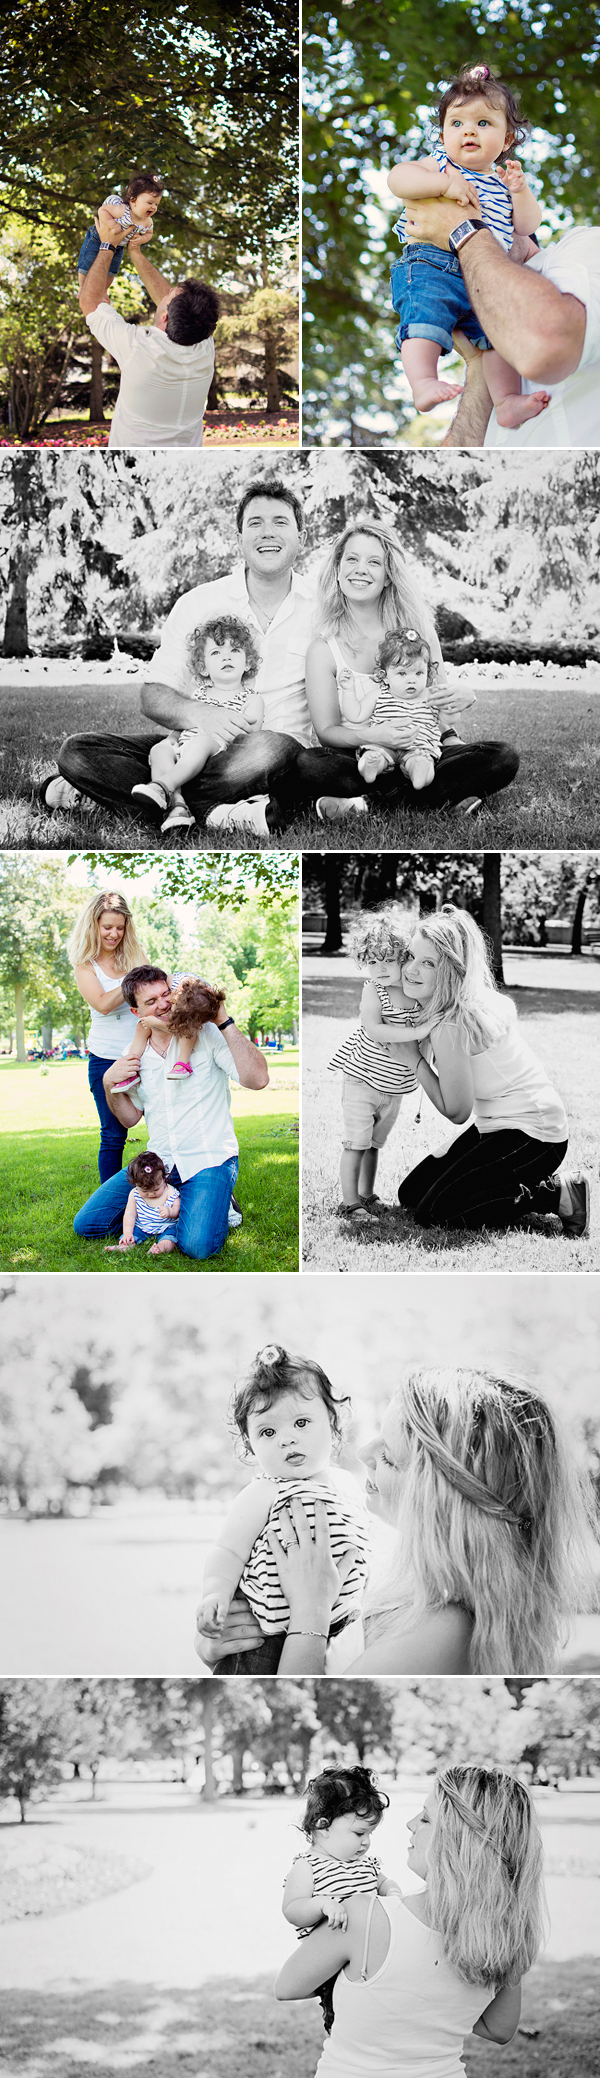 Adorable Family Session from Melissa Avey Photography - Praise Wedding